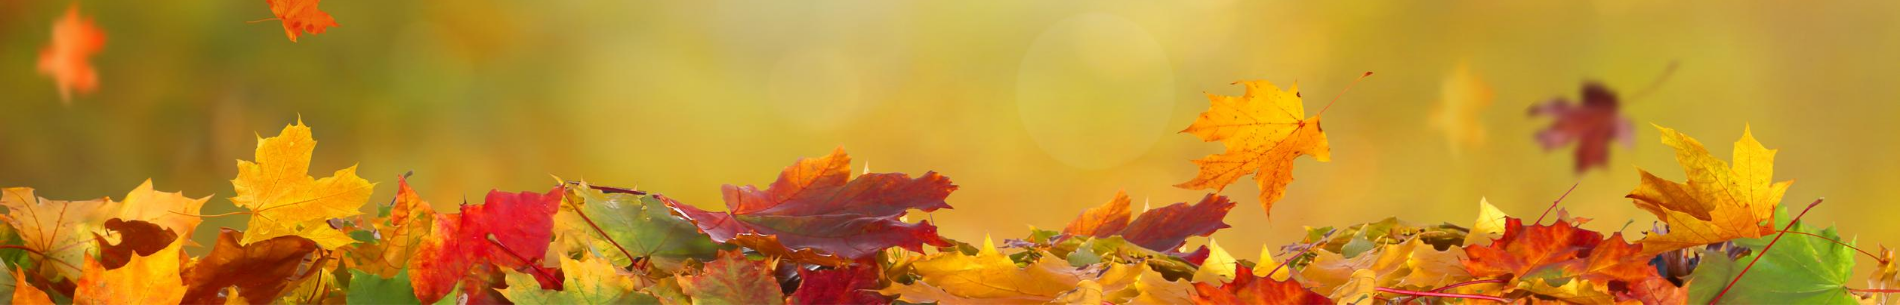 Autumn Banner with falling leaves